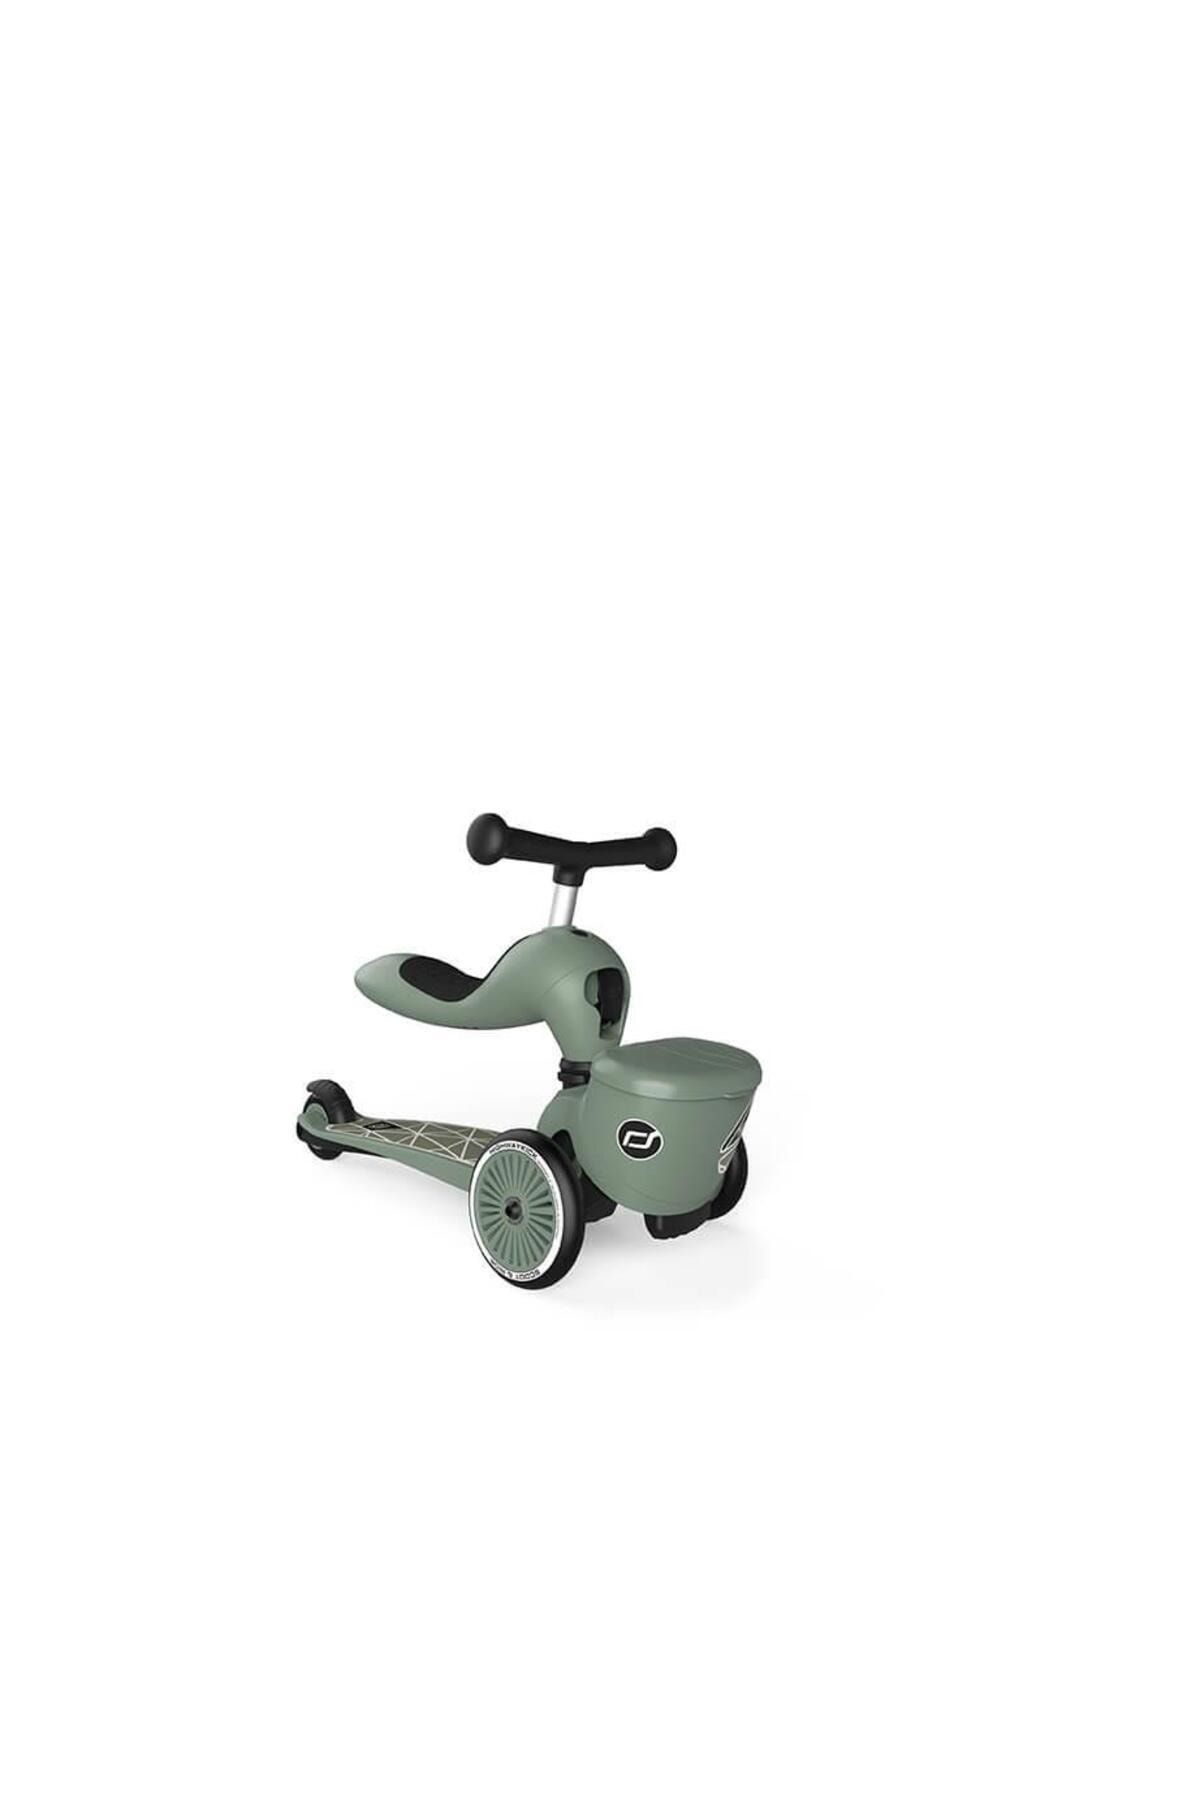 SCOOT AND RIDE Highwaykick 1 Lifestyle Scooter - Green Lines 210621-96604